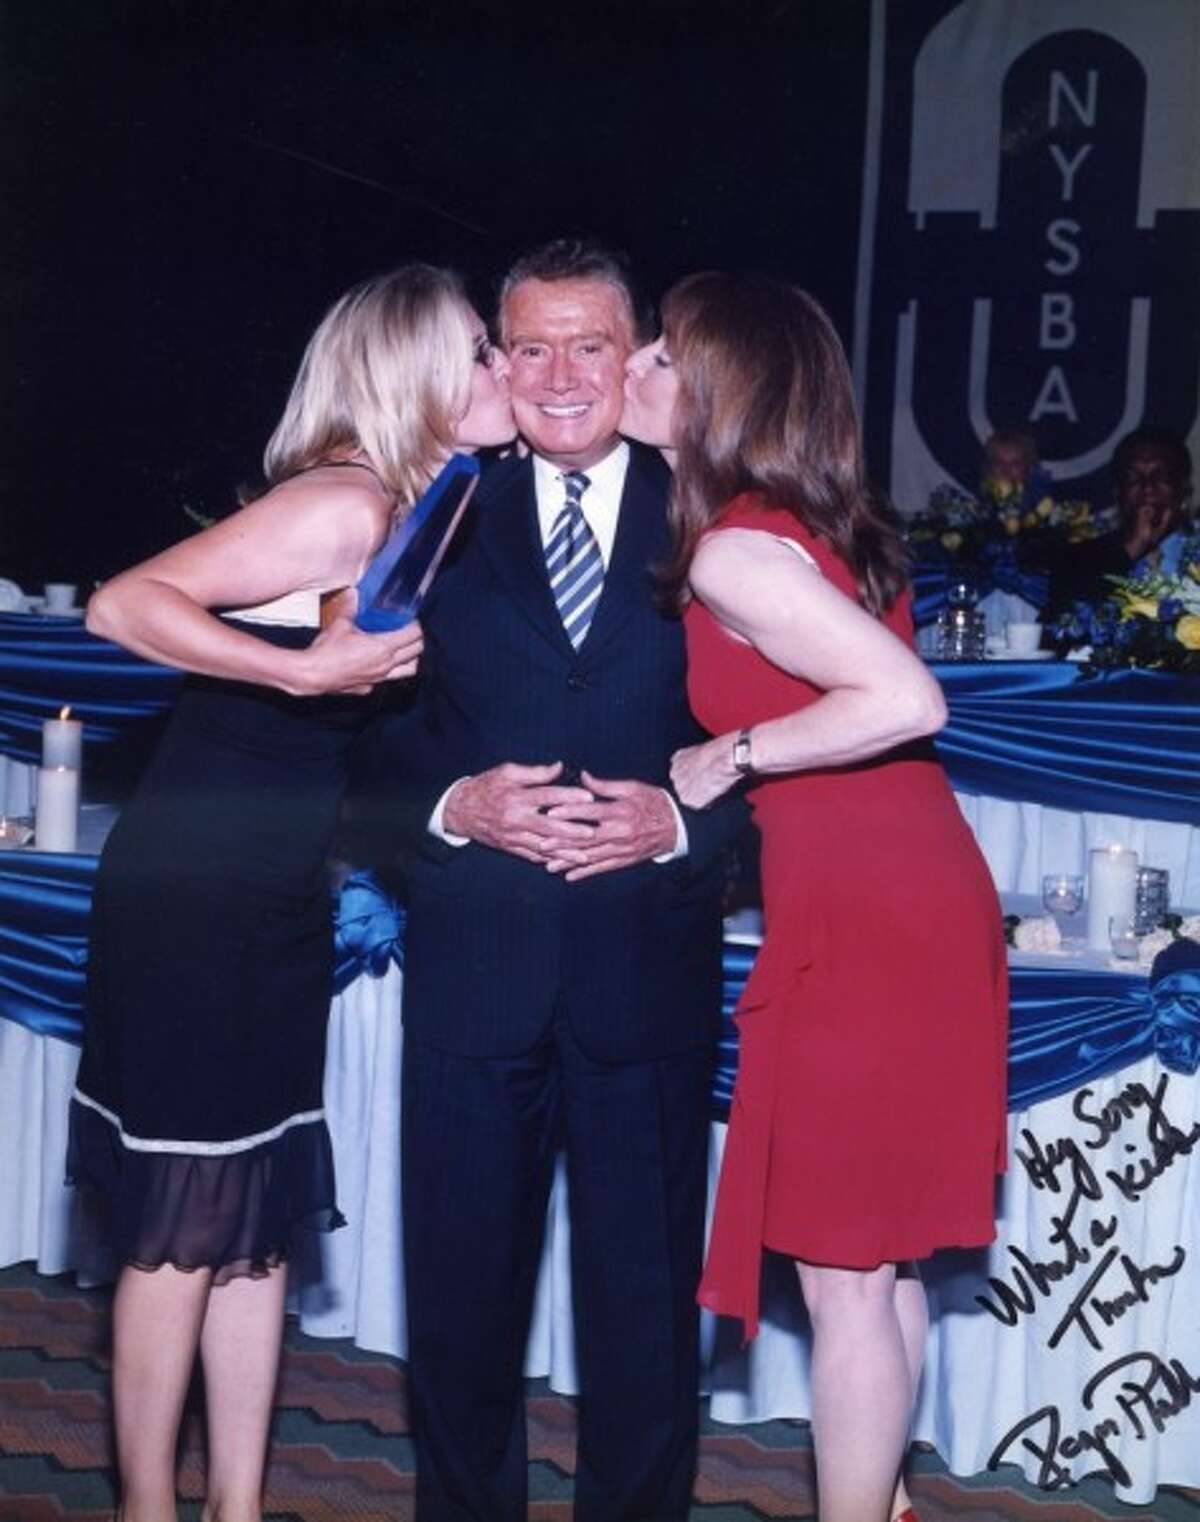 Sonja Stark and Judy Sanders smack a kiss on Regis Philbin after winning a National Broadcasters Award for finding an abducted baby in 1999.